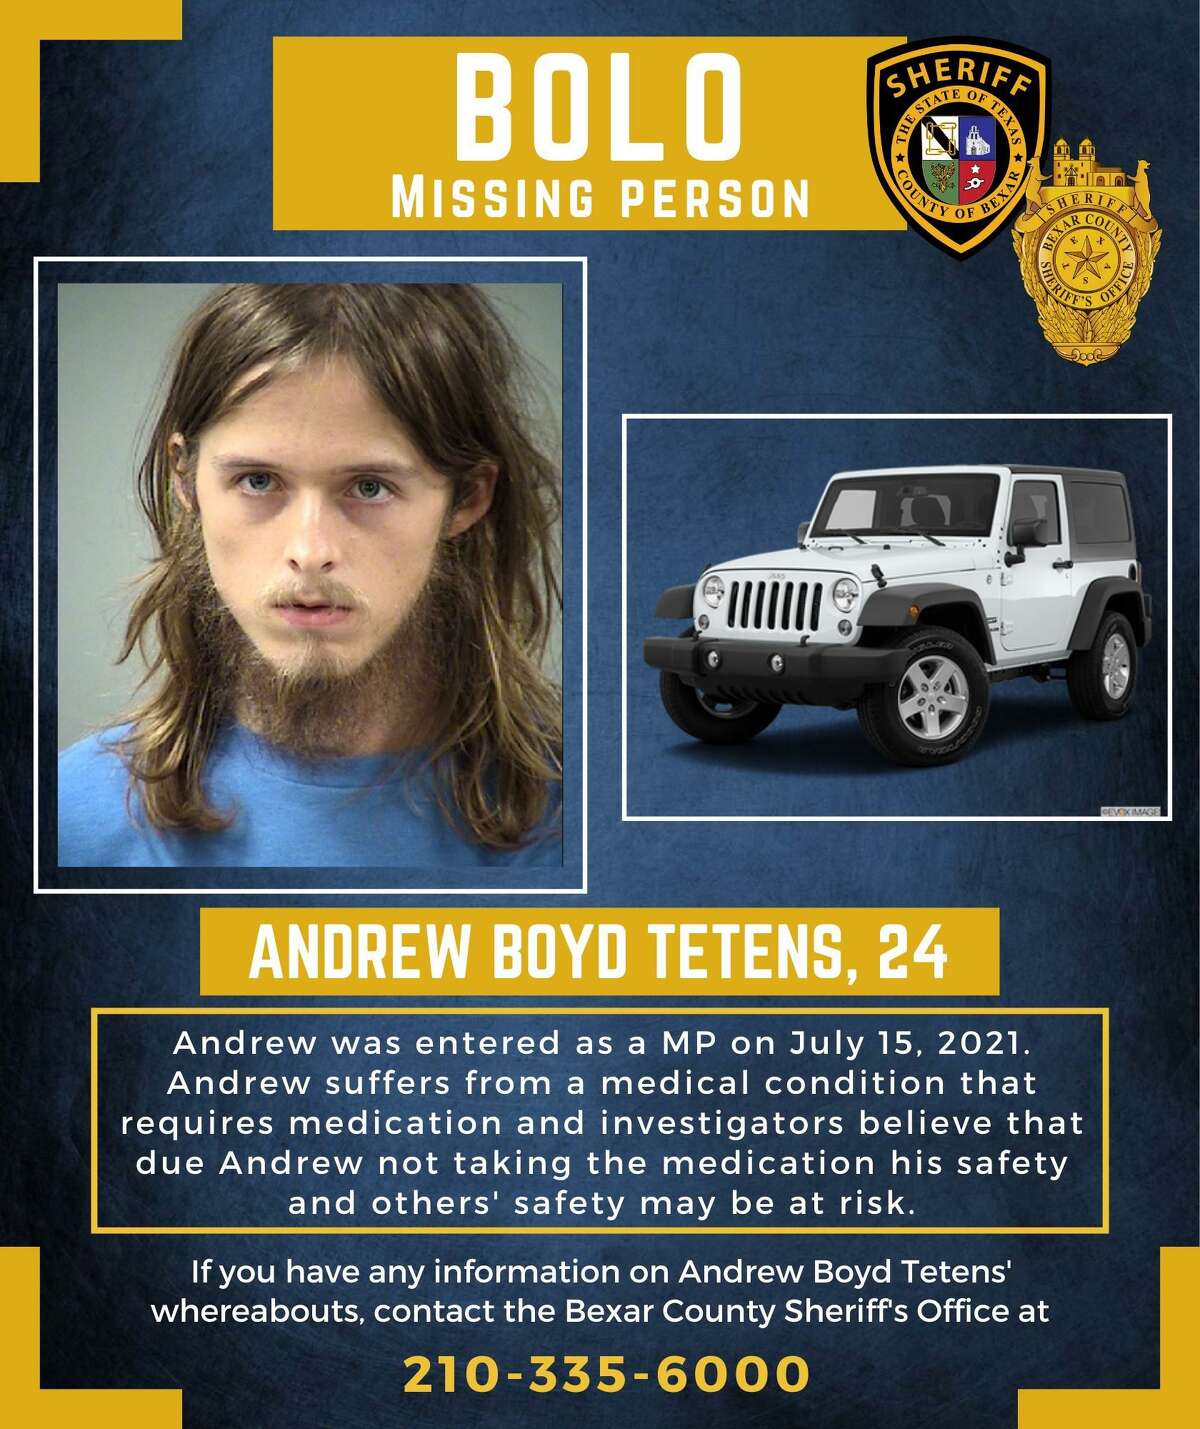 Andrew Boyd Tetens was found dead in West Virginia on July 16.